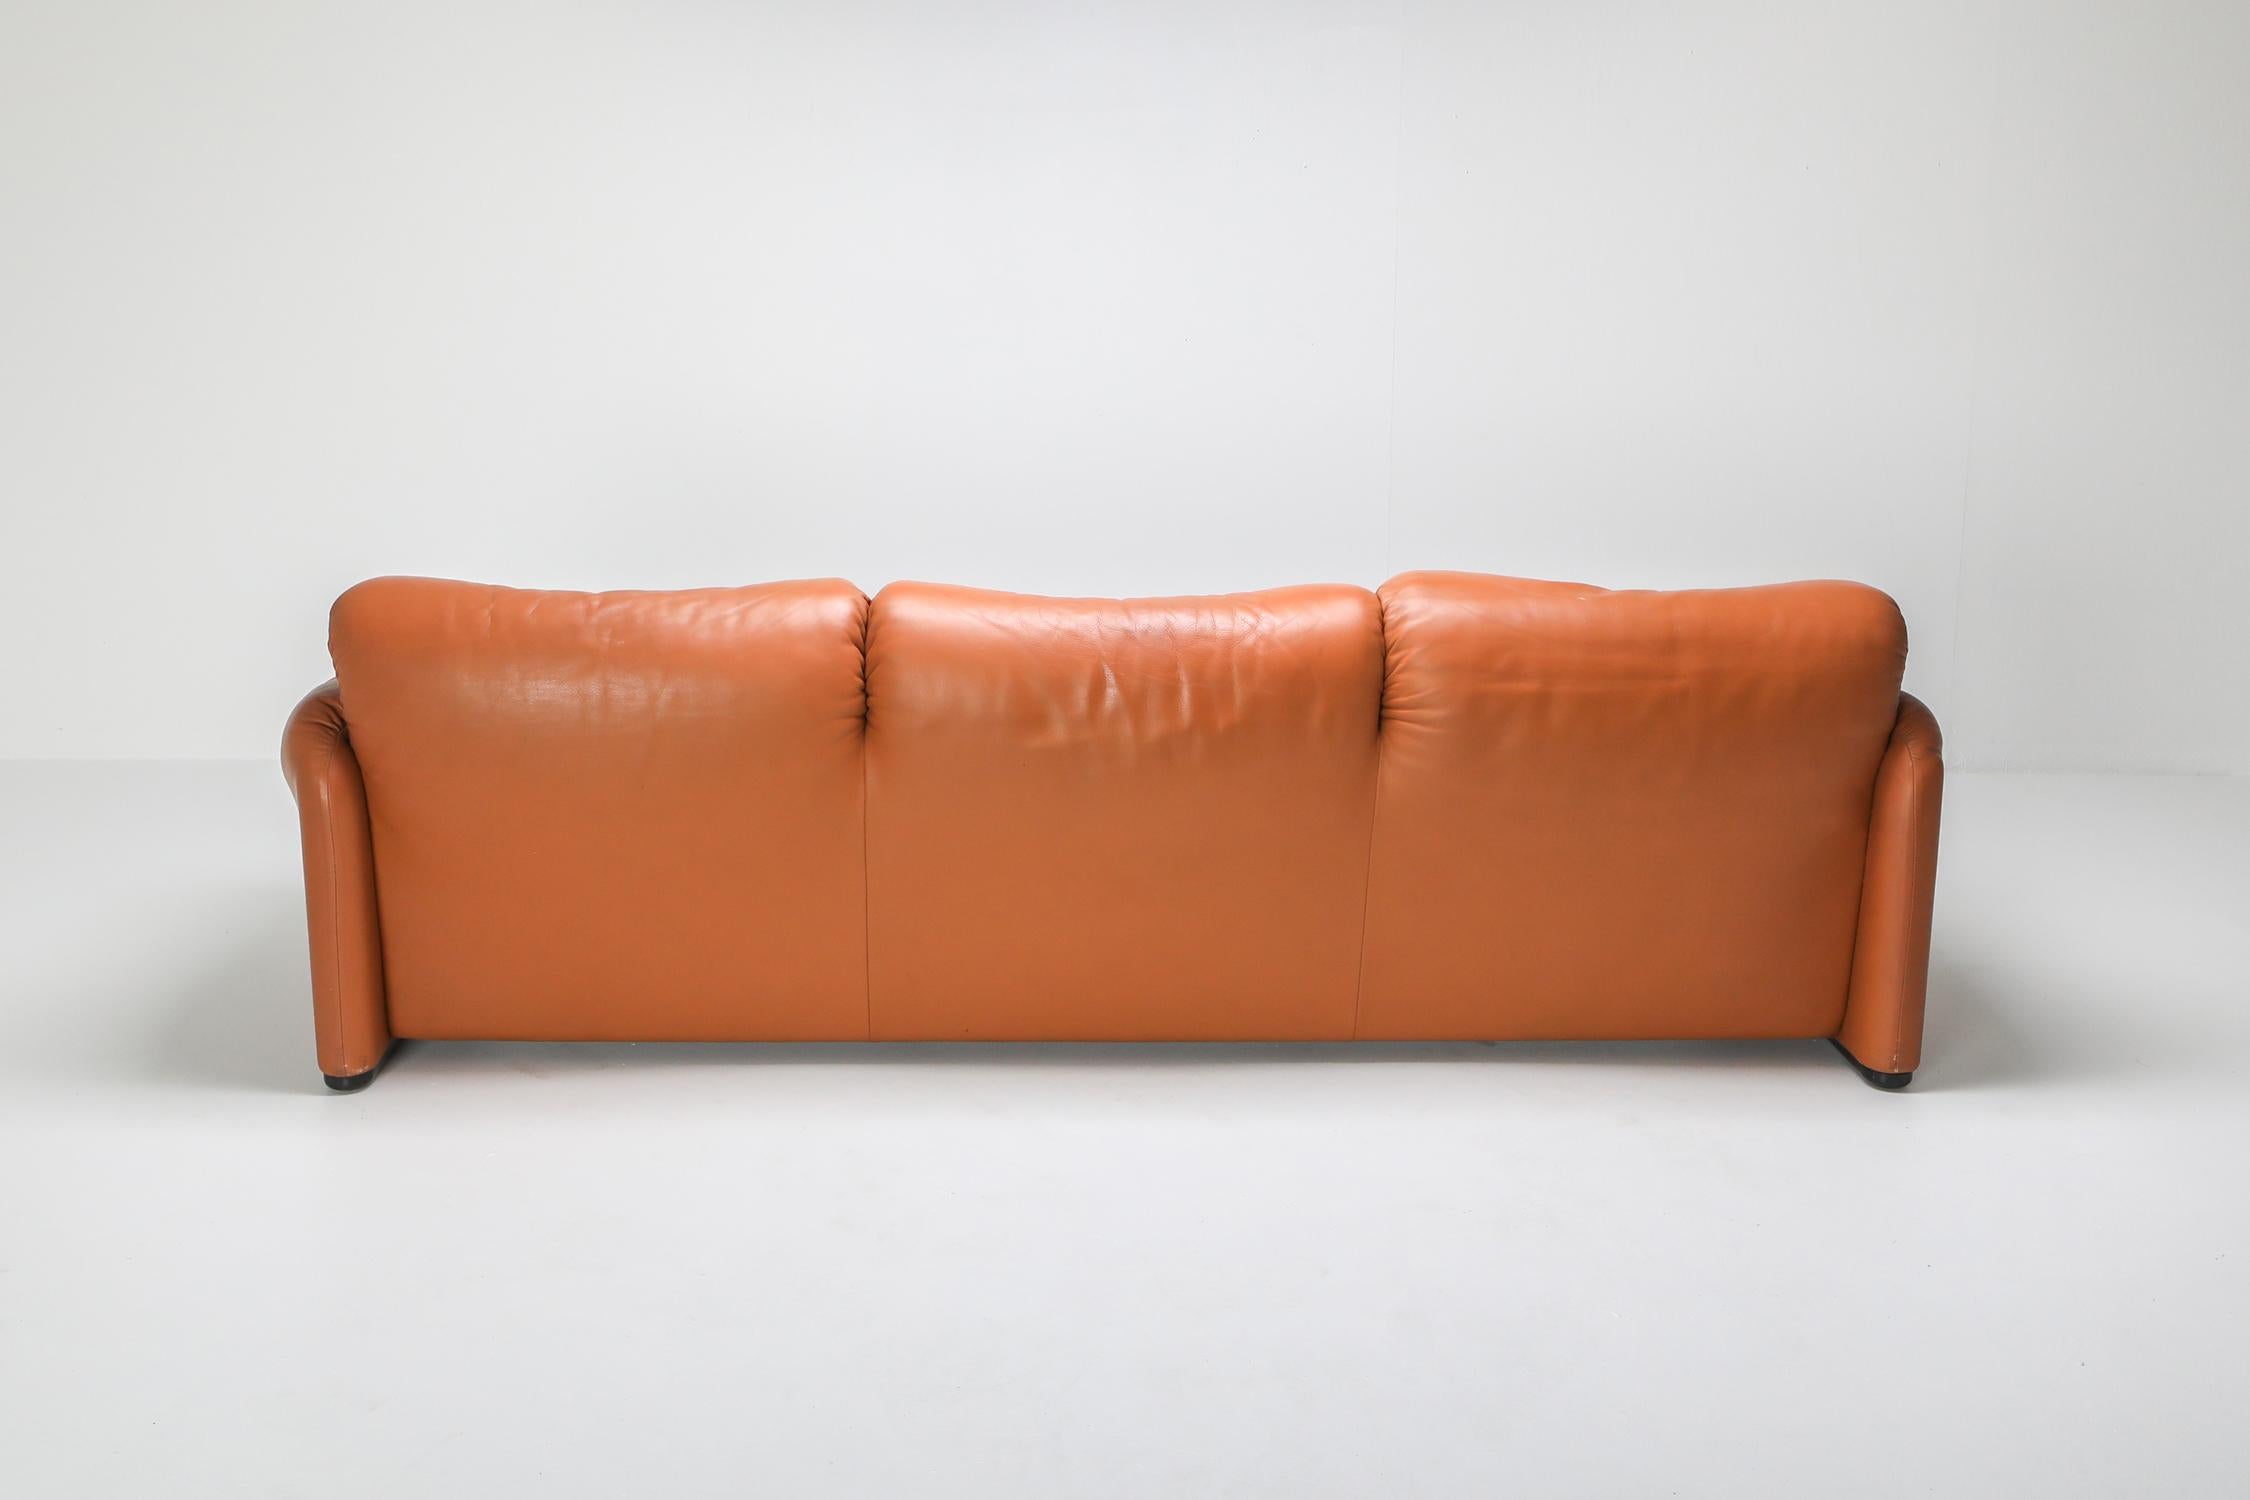 20th Century Maralunga Cognac Leather Couch by Vico Magistretti for Cassina, 1974